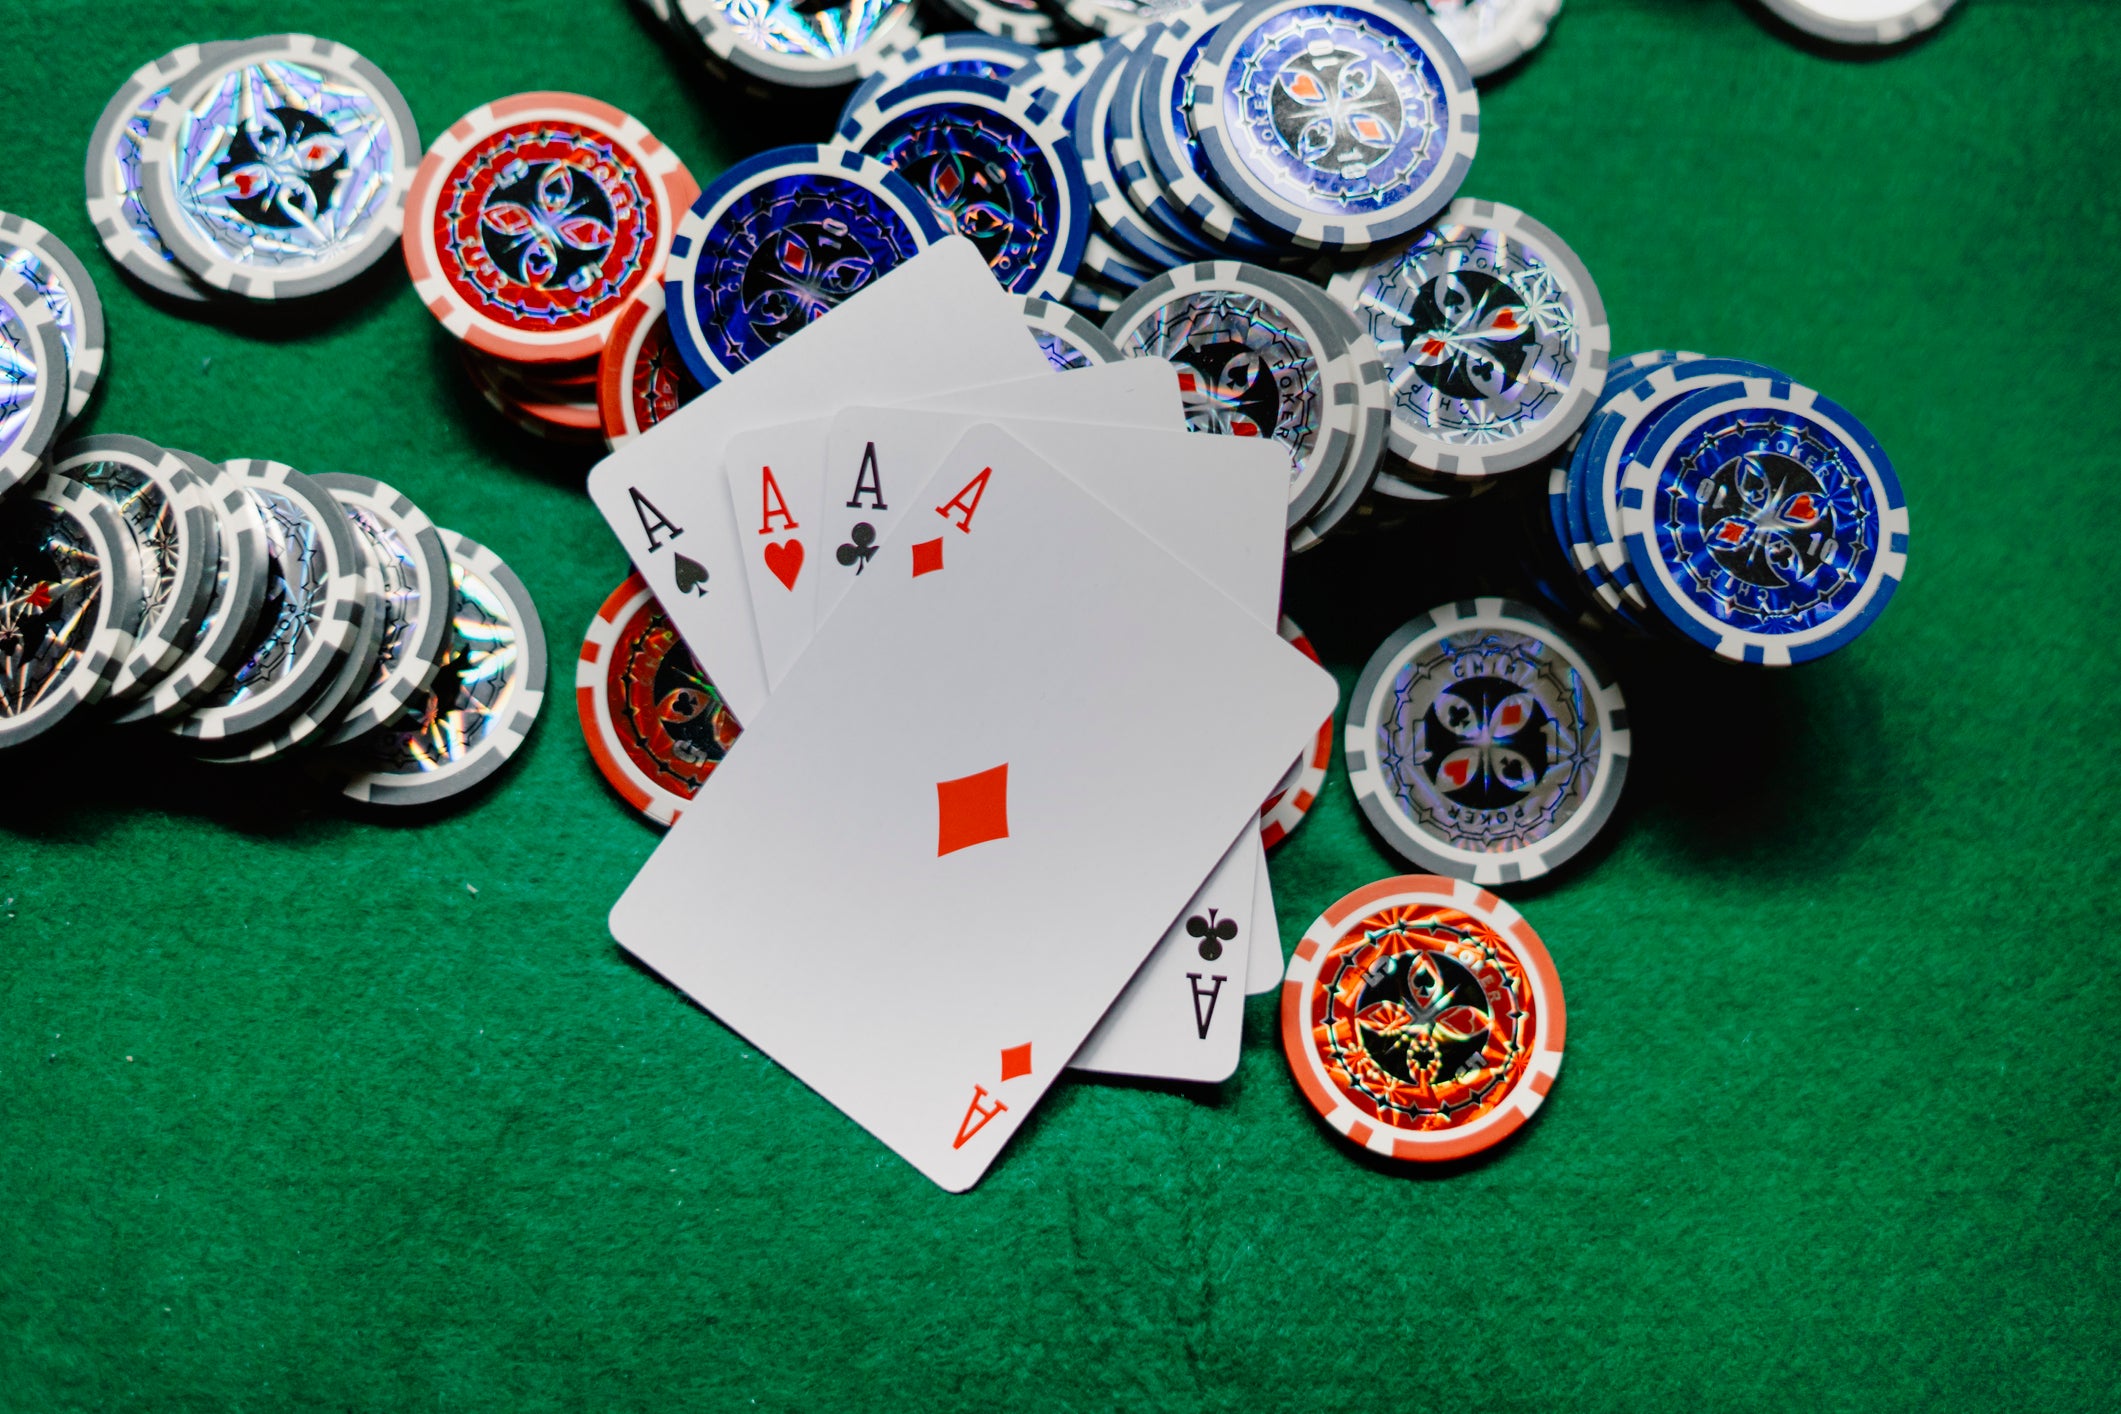 What Make Online Casino Cyprus Don't Want You To Know